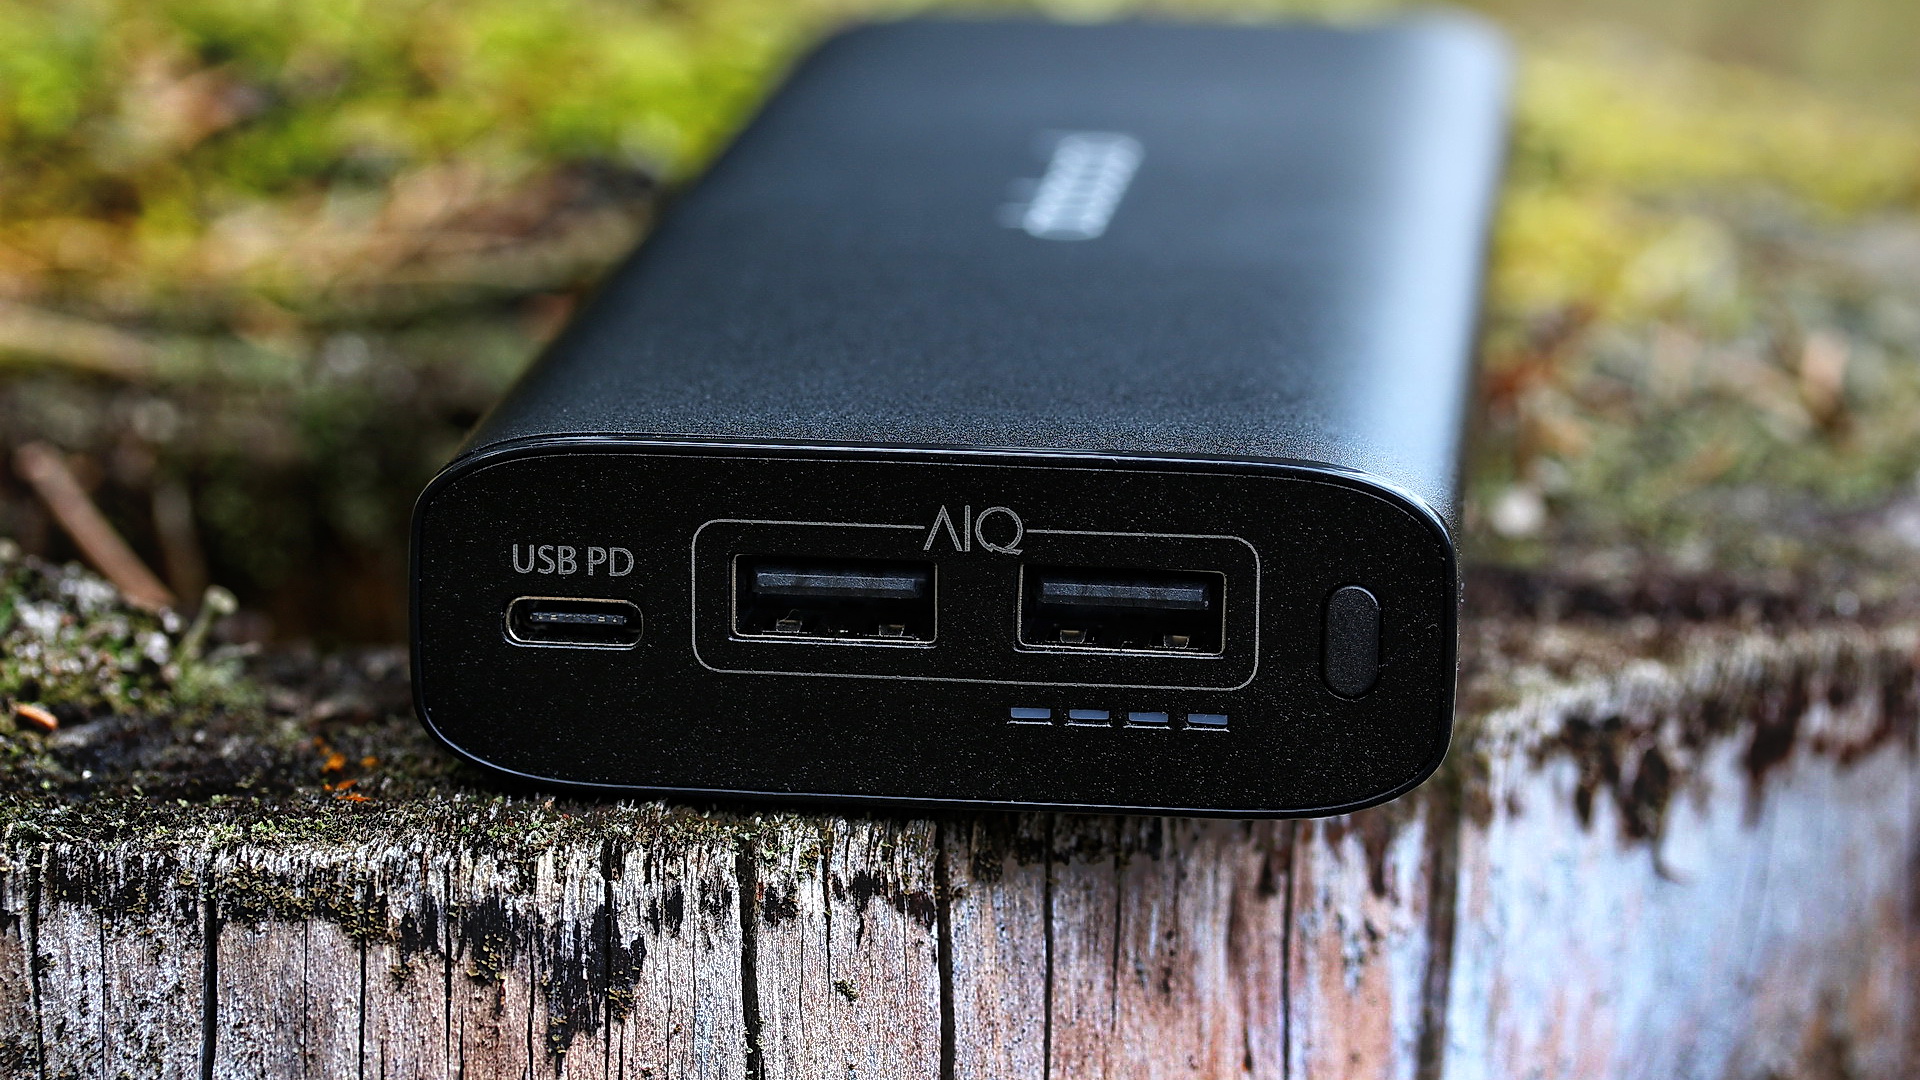 Hands-on: dodocool DP13 20100 mAh Bank with 45 USB-C PD - NotebookCheck.net Reviews